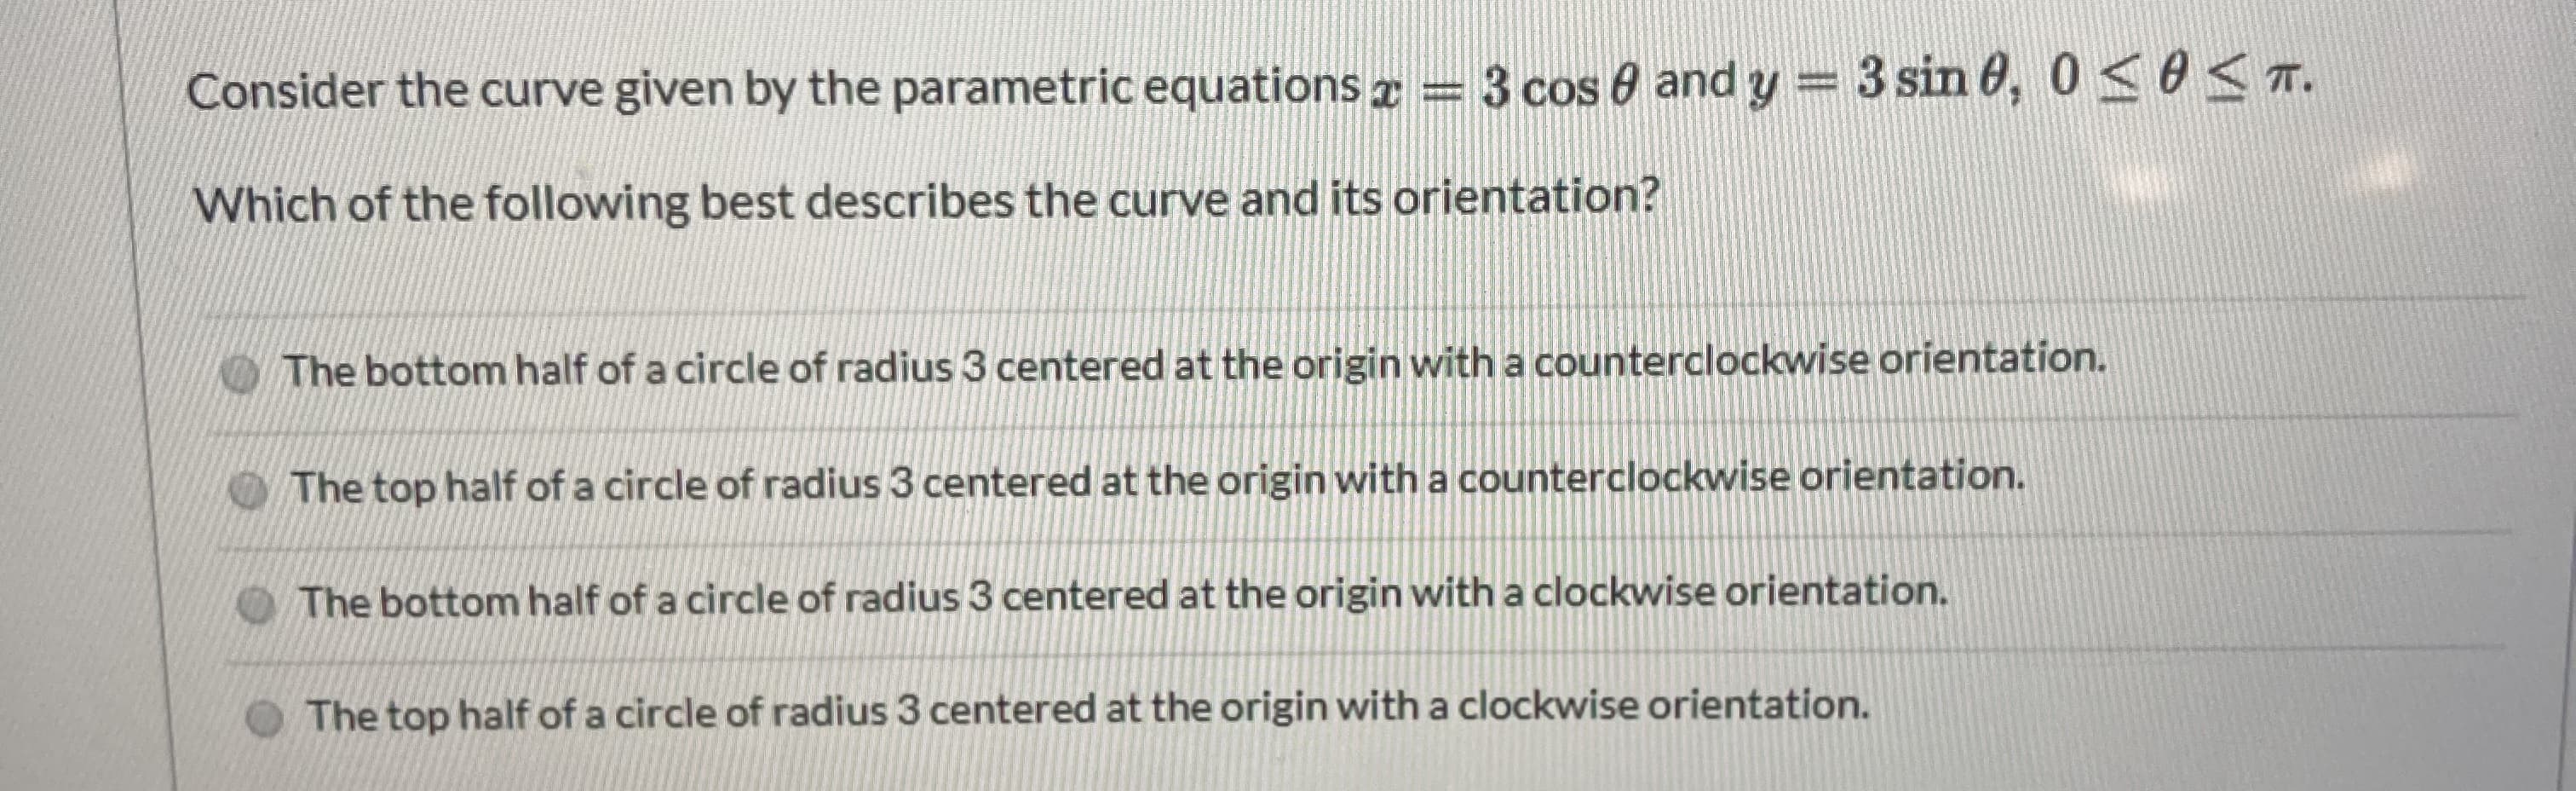 Consider the curve given by the parametric equations = 3 cos 0 and y = 3 sin 6, 0<0<T.
Which of the following best describes the curve and its orientation?
